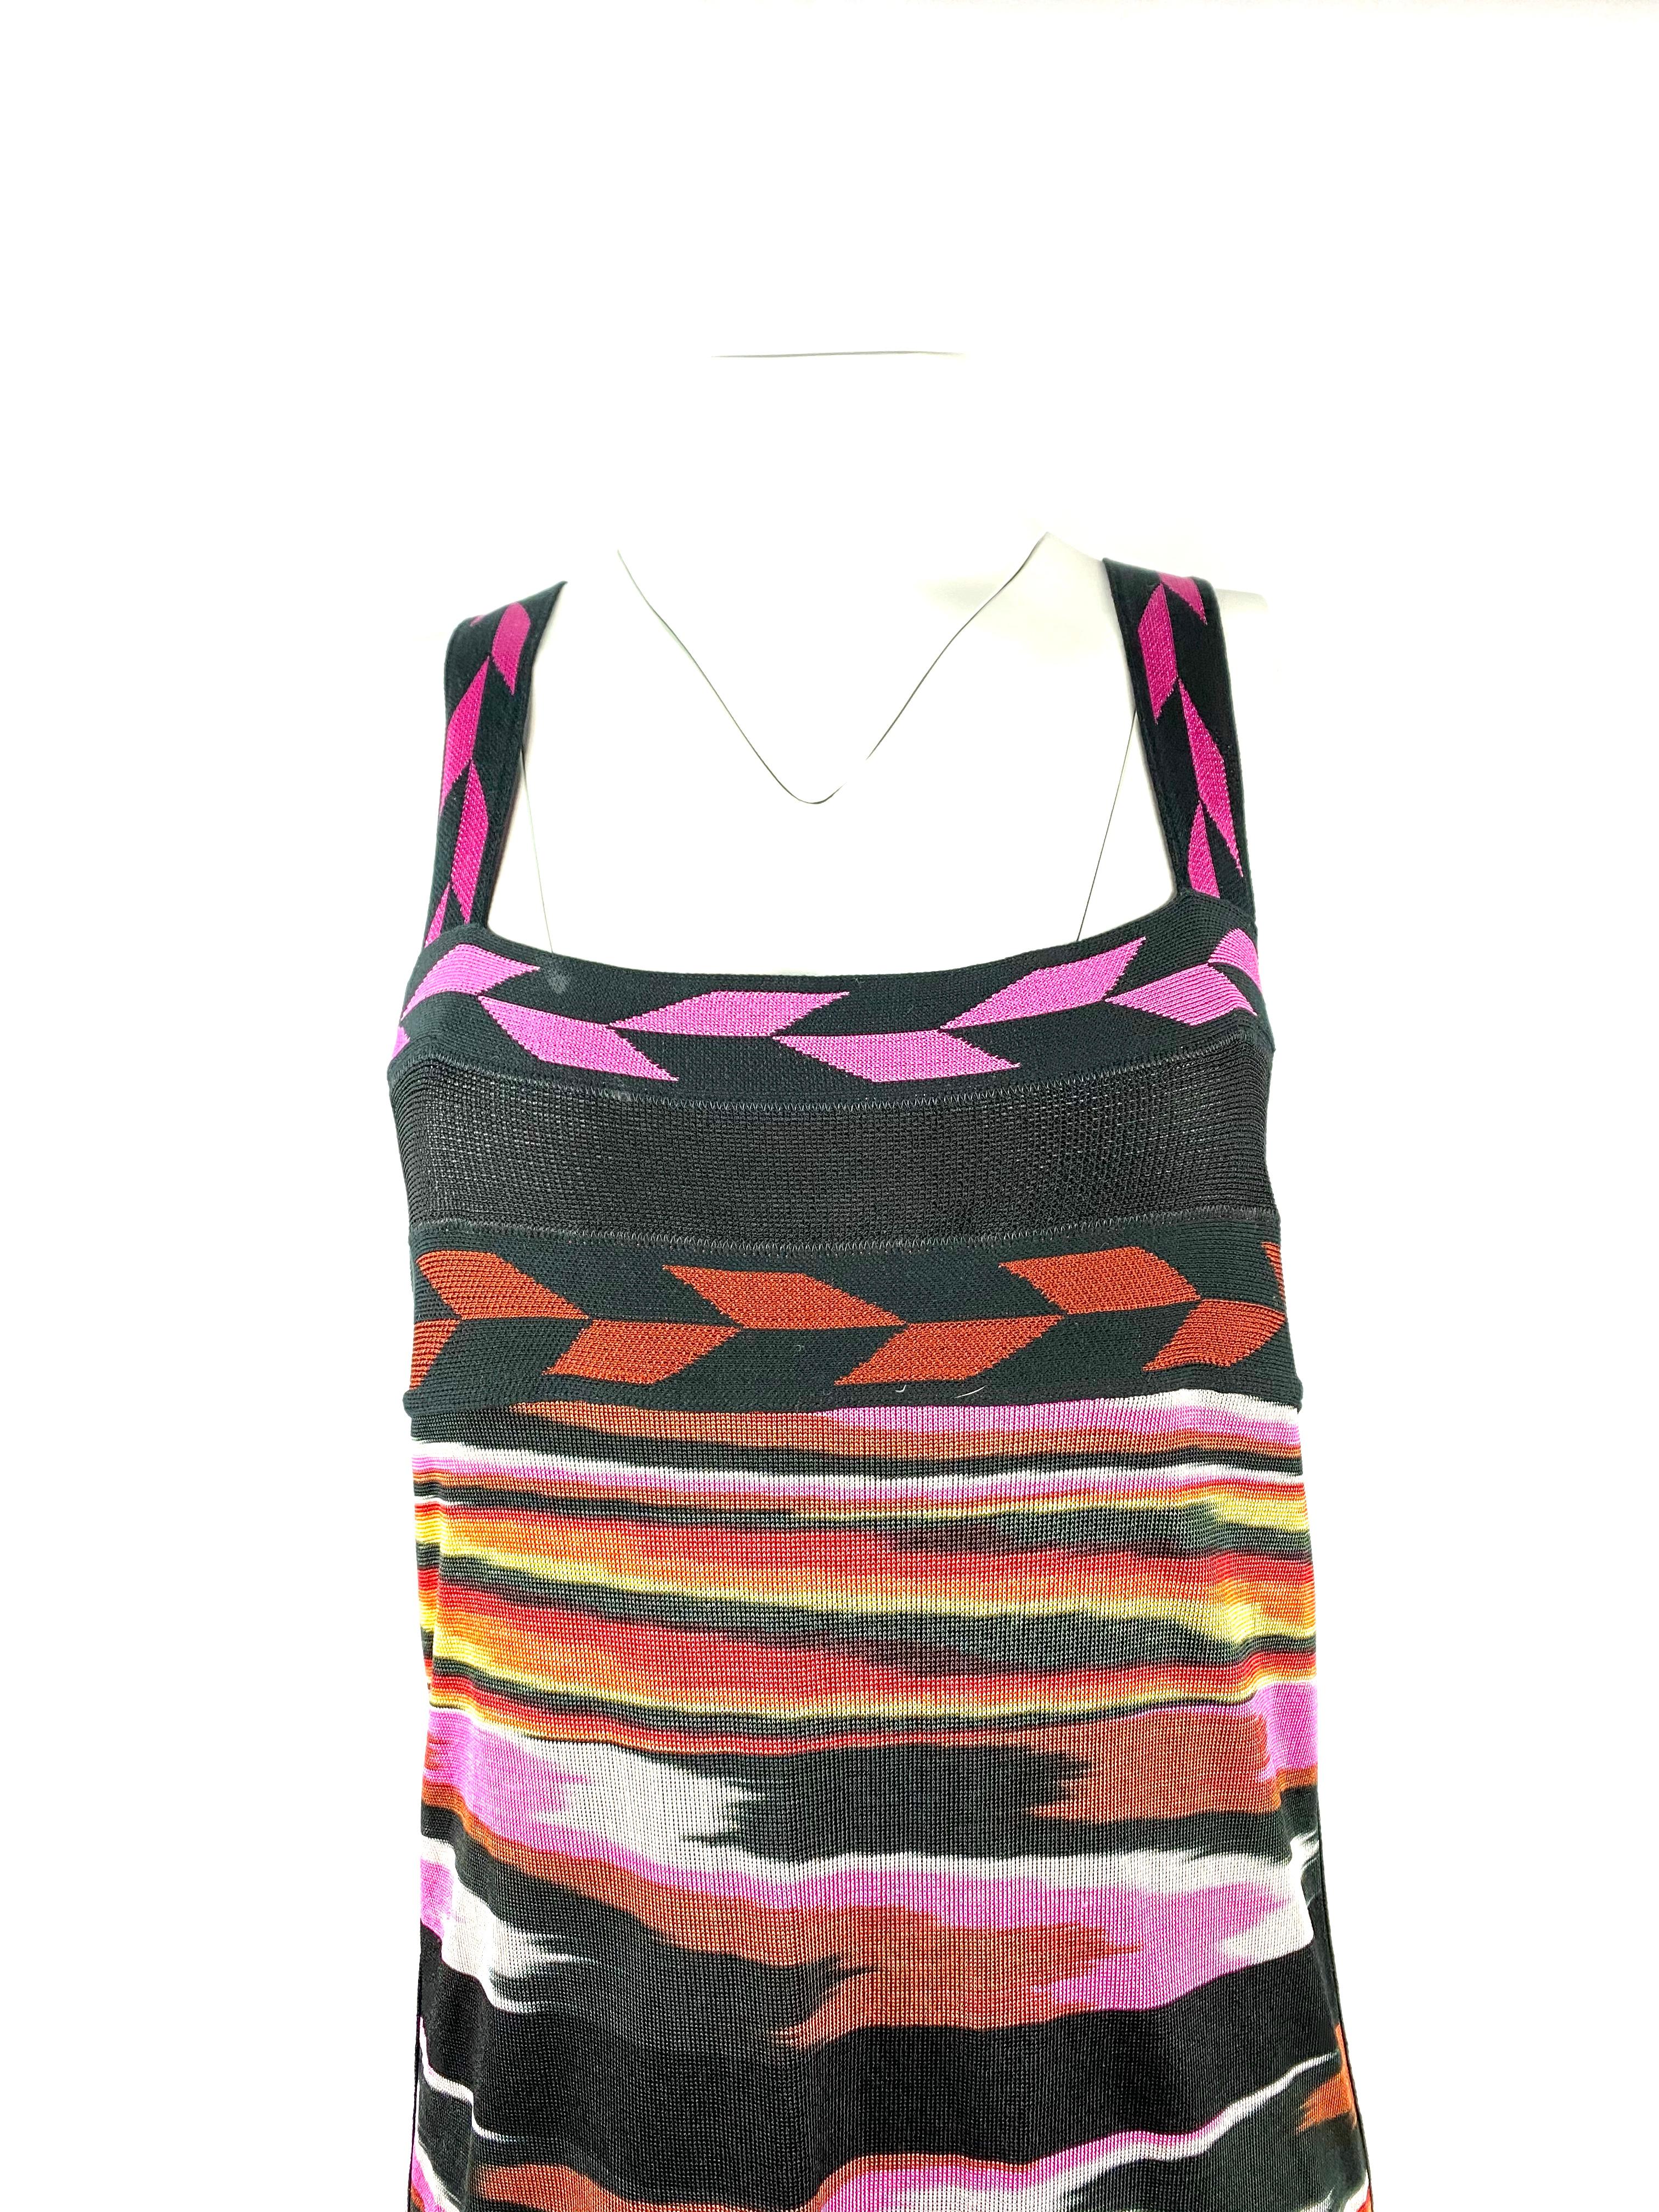 
MISSONI Black and Multi Color Sleeveless Spaghetti Strap Maxi Dress

Product detail:
100% Polyester
Black and pink, yellow, orange abstract print
Maxi
Spaghetti straps drops 7” long 
Featuring one split on each side 20.5” long 
Made in Italy
